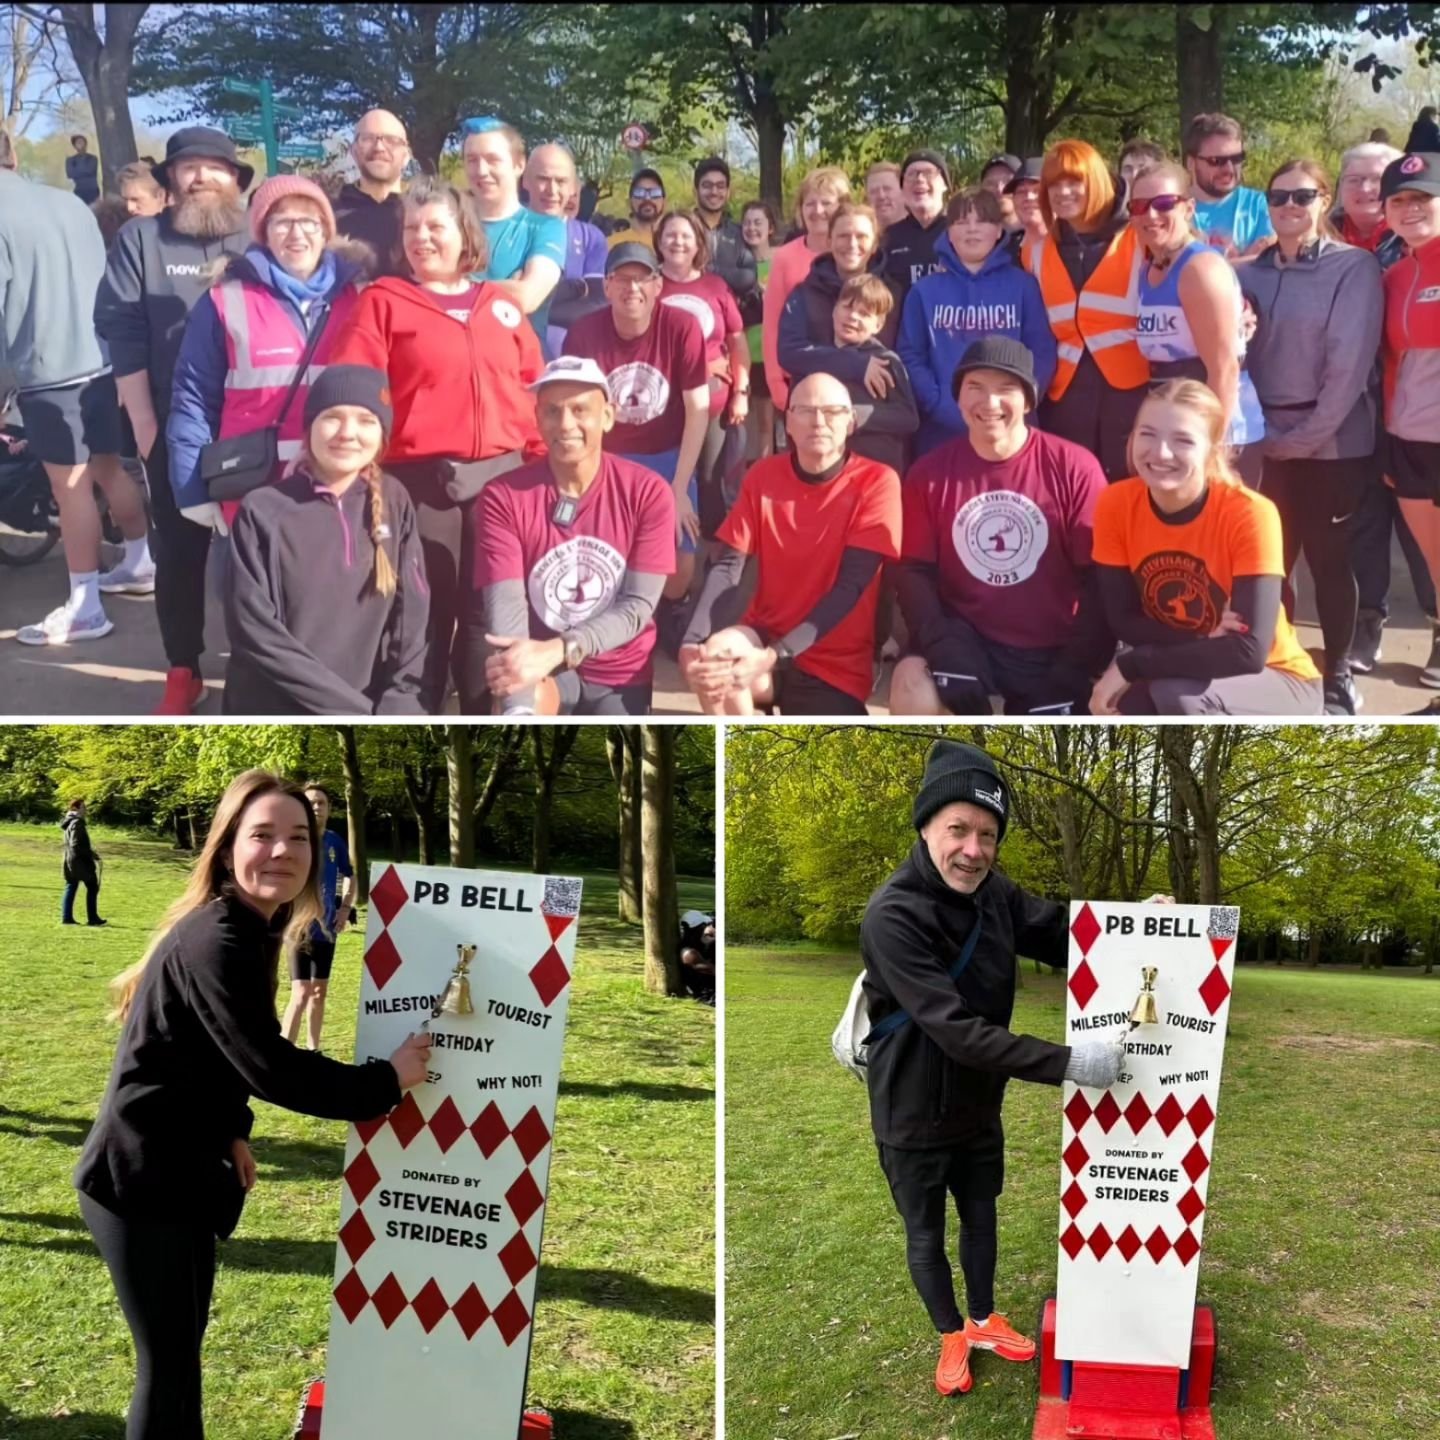 We had a fantastic turn out at our home park run @stevenage_parkrun and some brilliant PBs, first in age category for Karl and a second place lady for Storm. A first ever park run for one of our new 0-5k team Dani and yet another PB for another 0-5k 